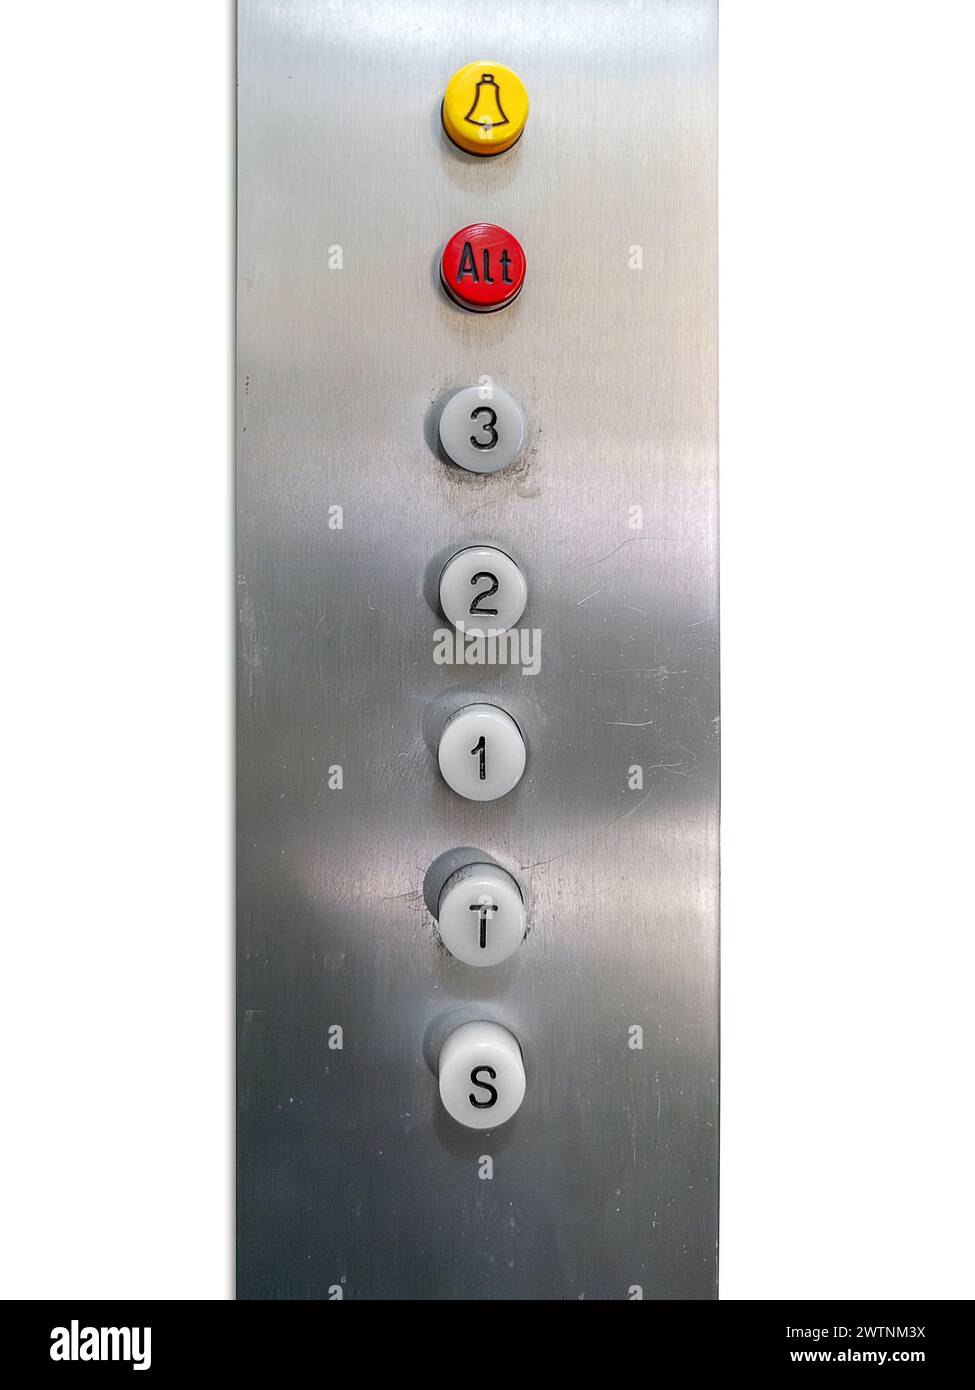 1970s vintage elevator buttons with red alt key and yellow alarm key on aluminum dashboard isolated on white with clipping path included Stock Photo